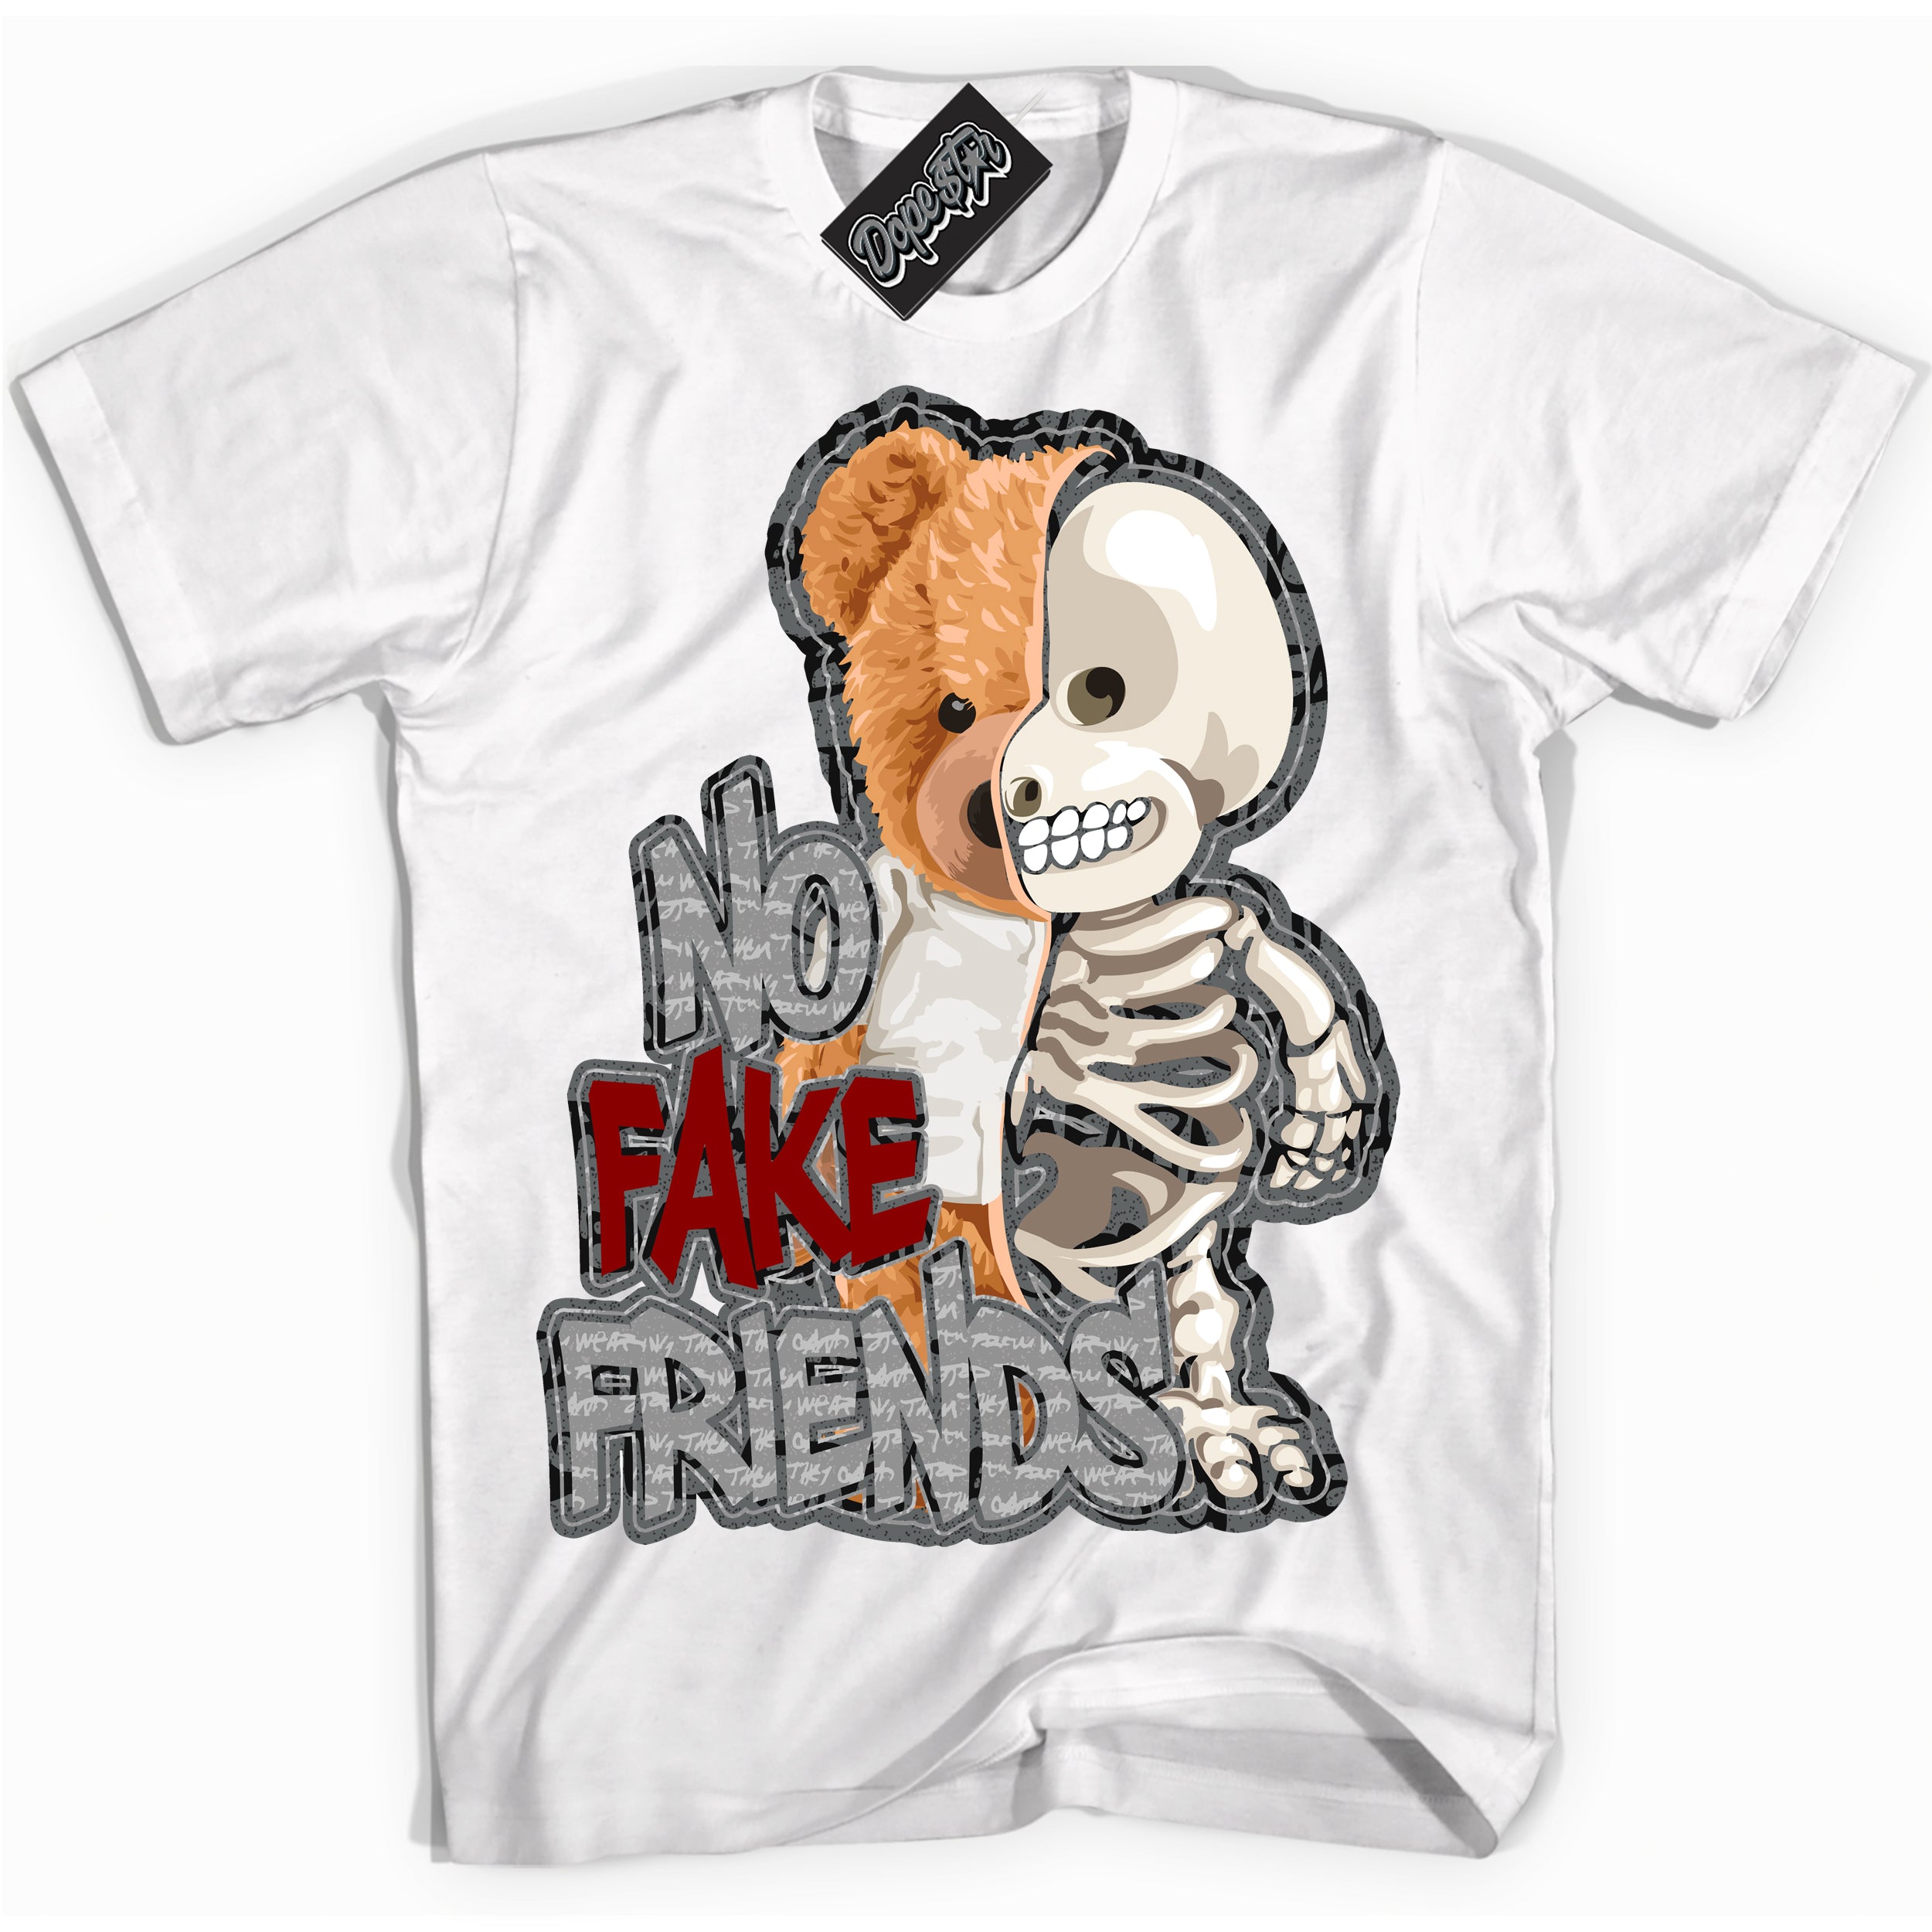 Cool White Shirt with “ No Fake Friends ” design that perfectly matches Rebellionaire 1s Sneakers.